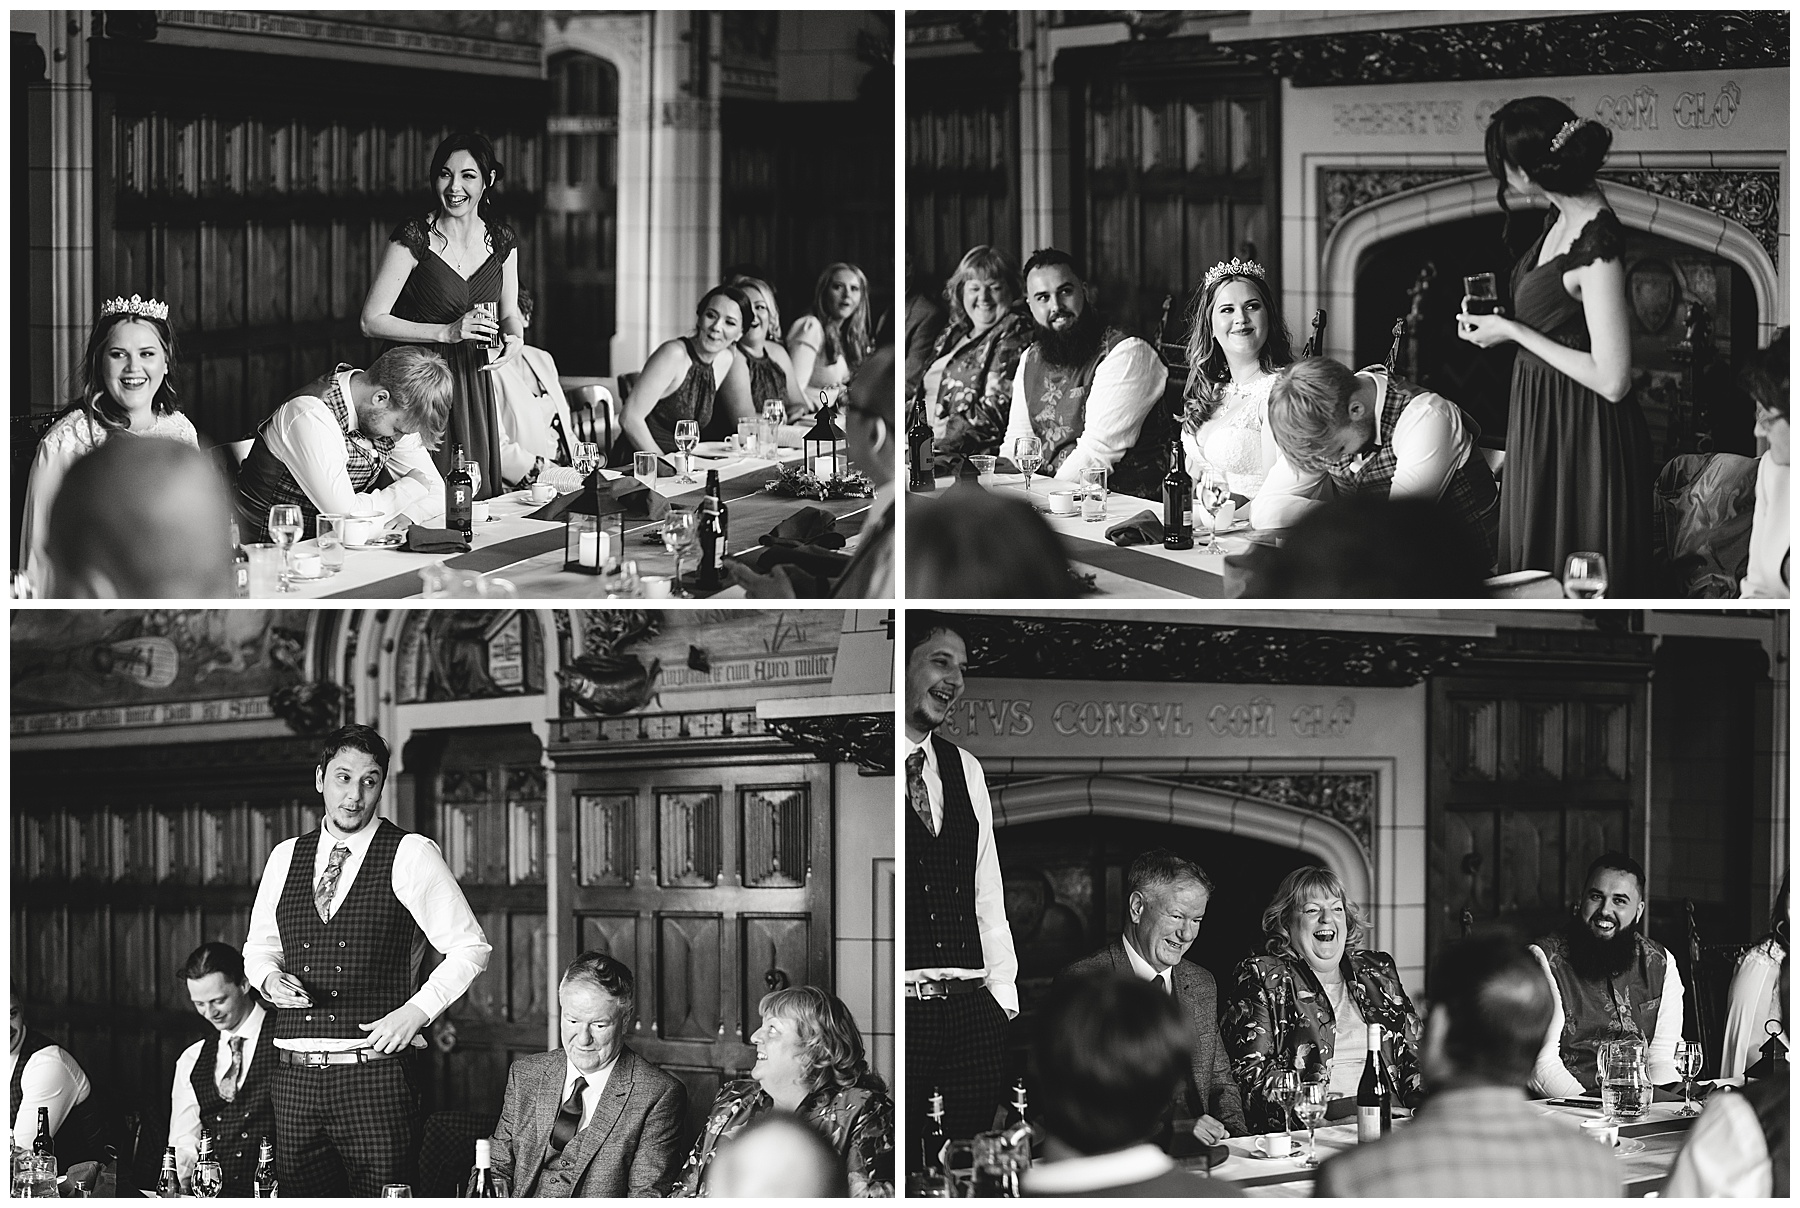 Wedding Speeches at Cardiff Castle